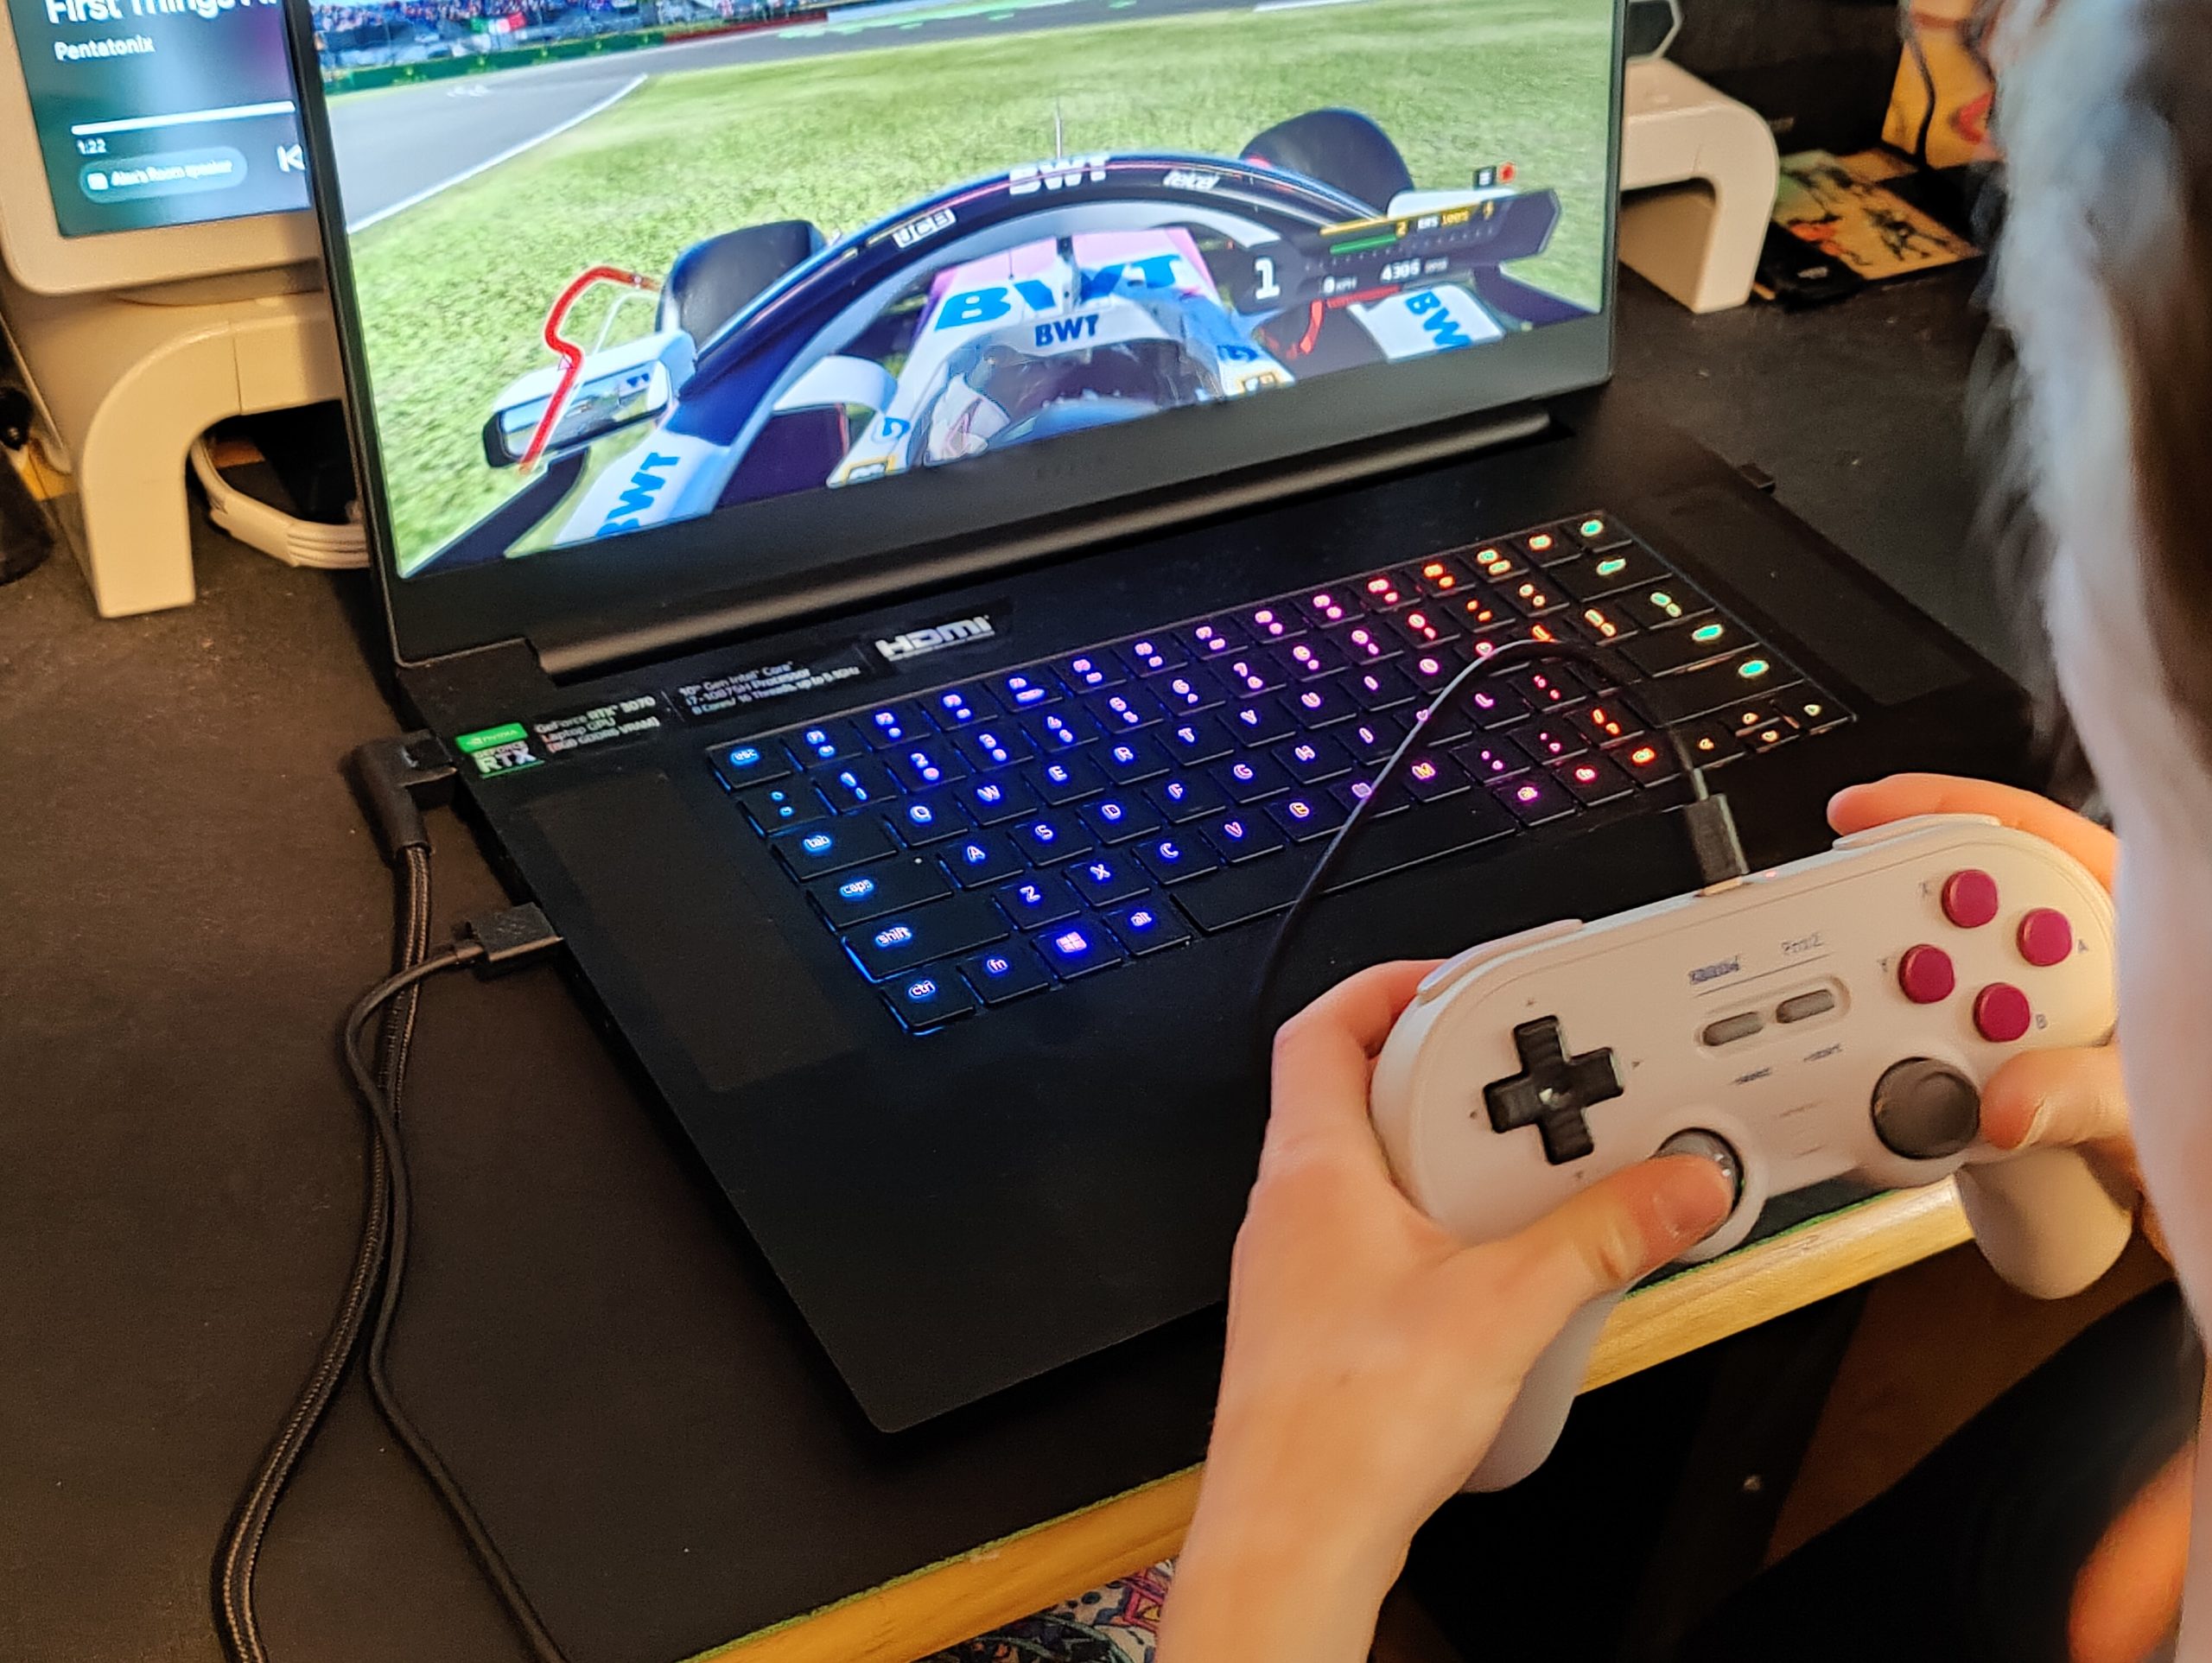 8bitdo Sn30 Pro 2 Controller Review A Cross Platform Solution That S Capable But Not Suited To All Games Ausdroid